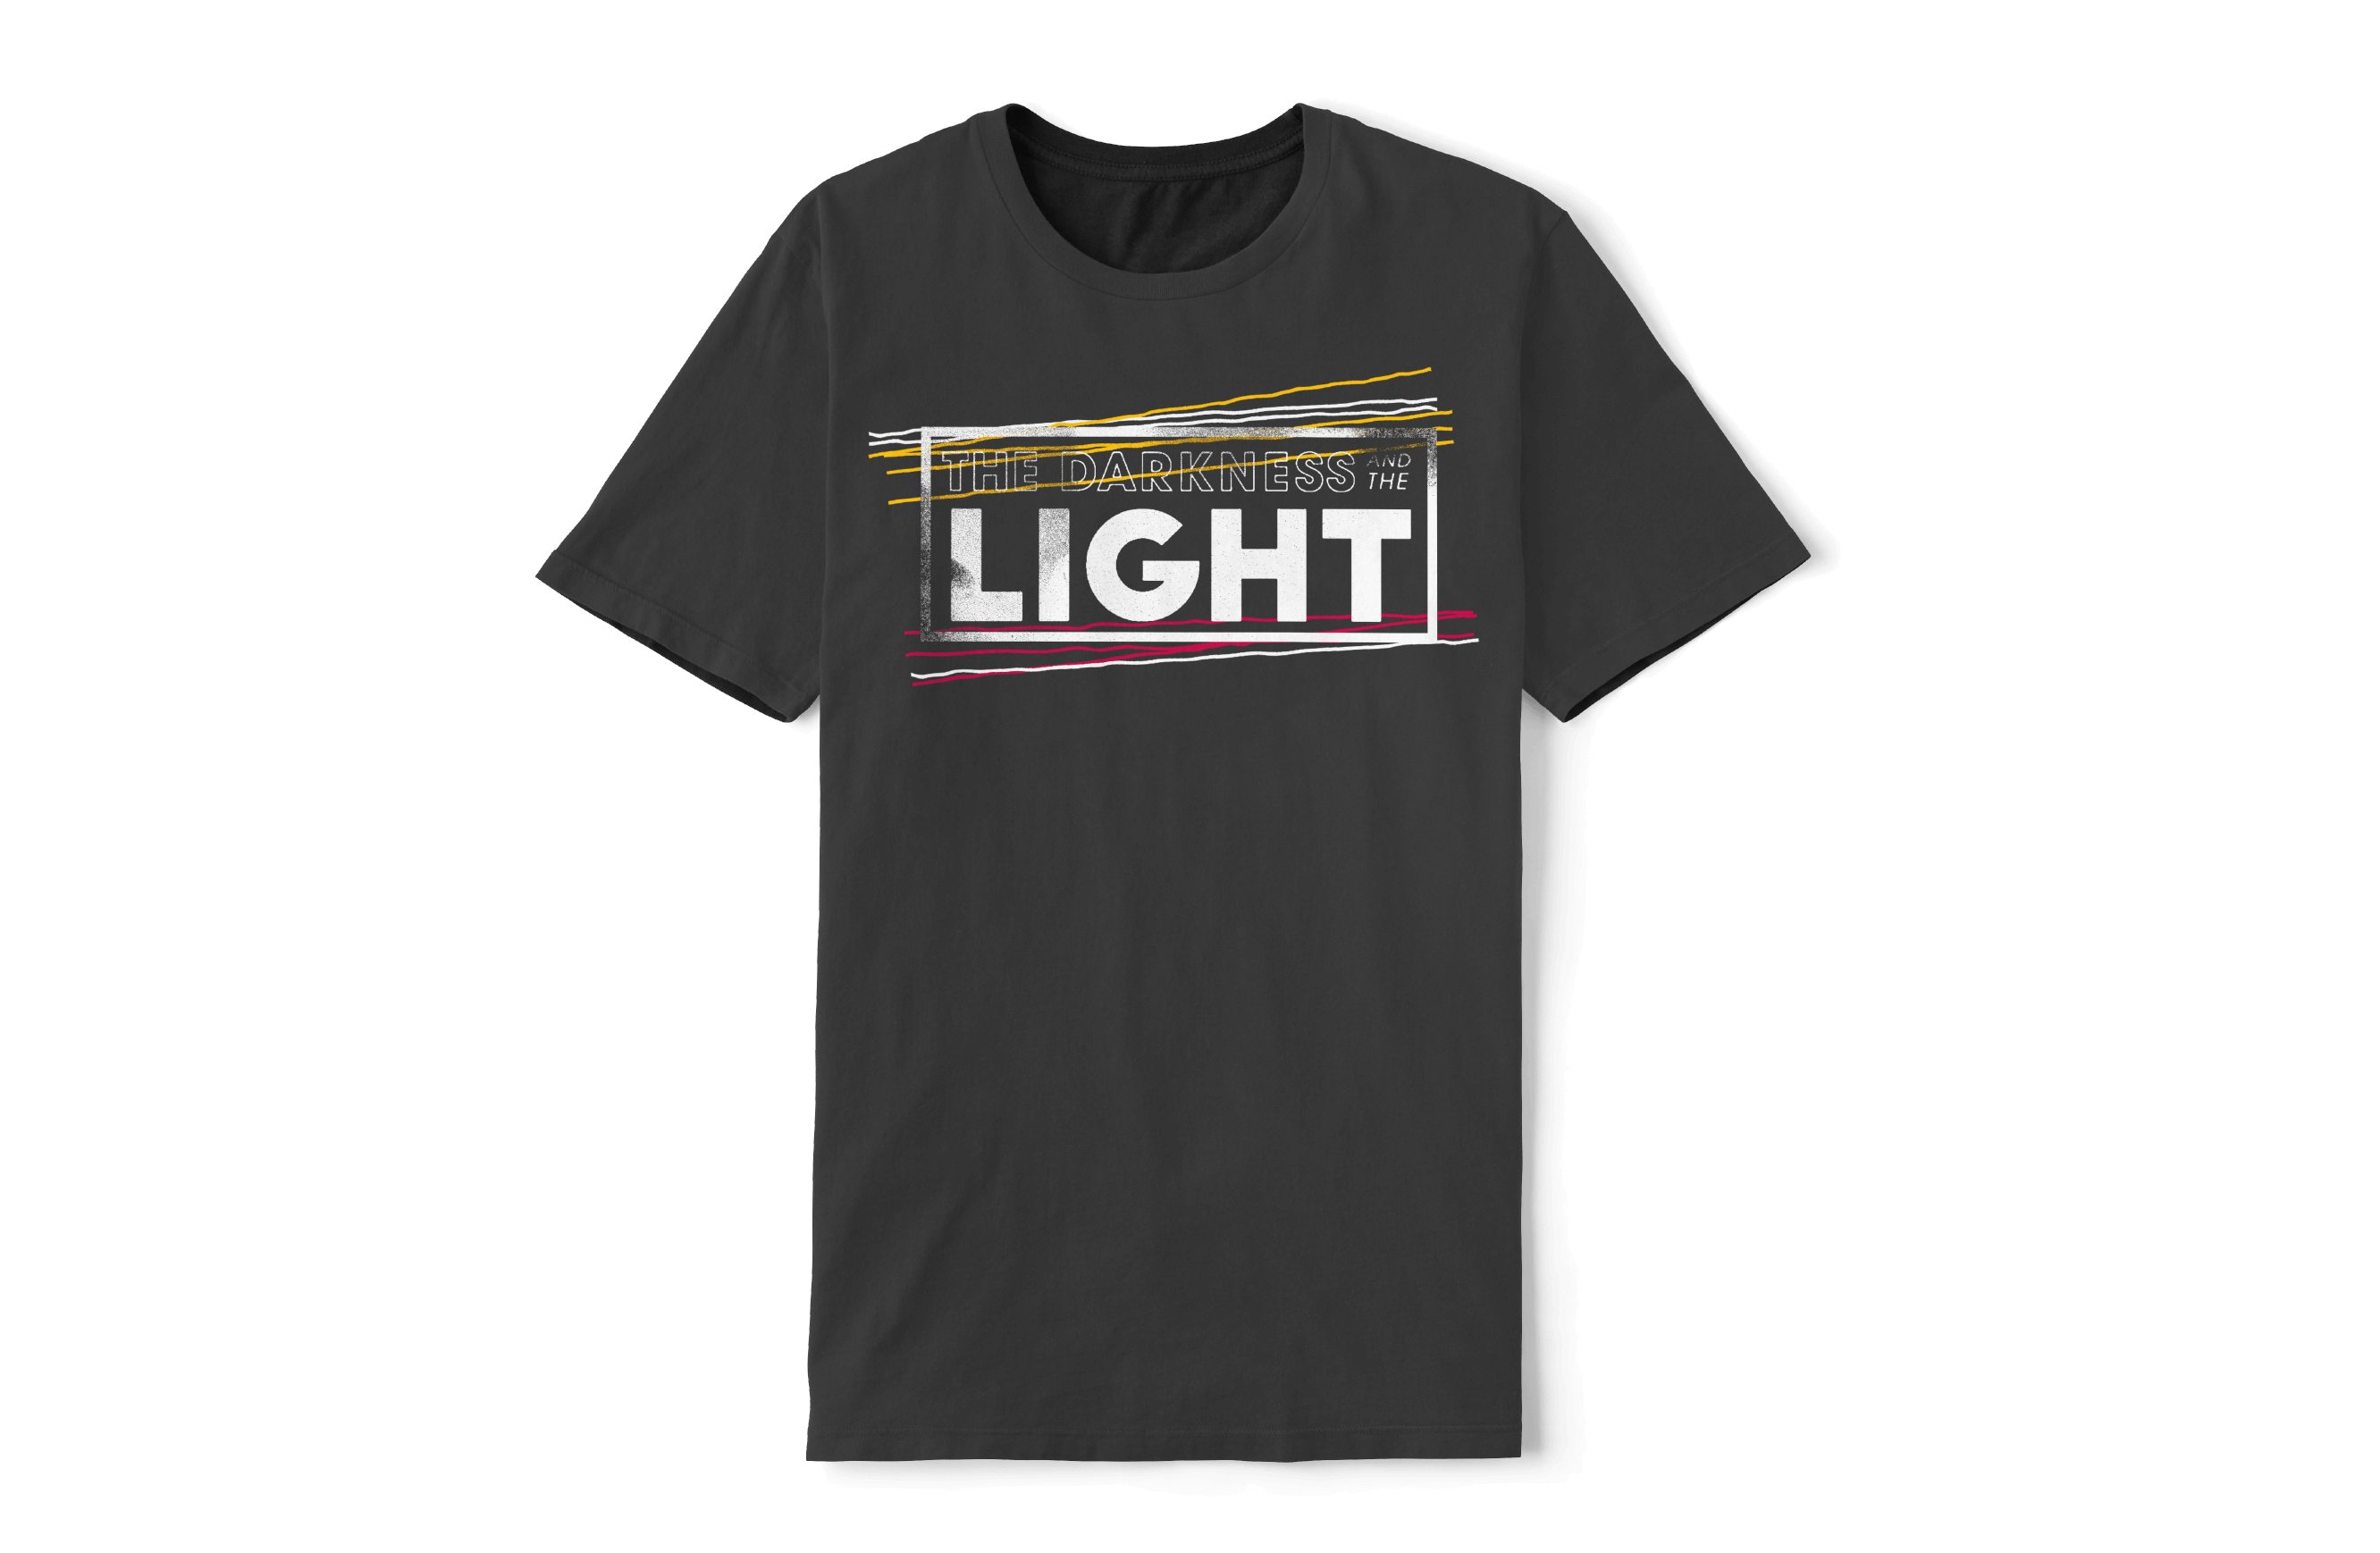 The Darkness and The Light T-Shirt